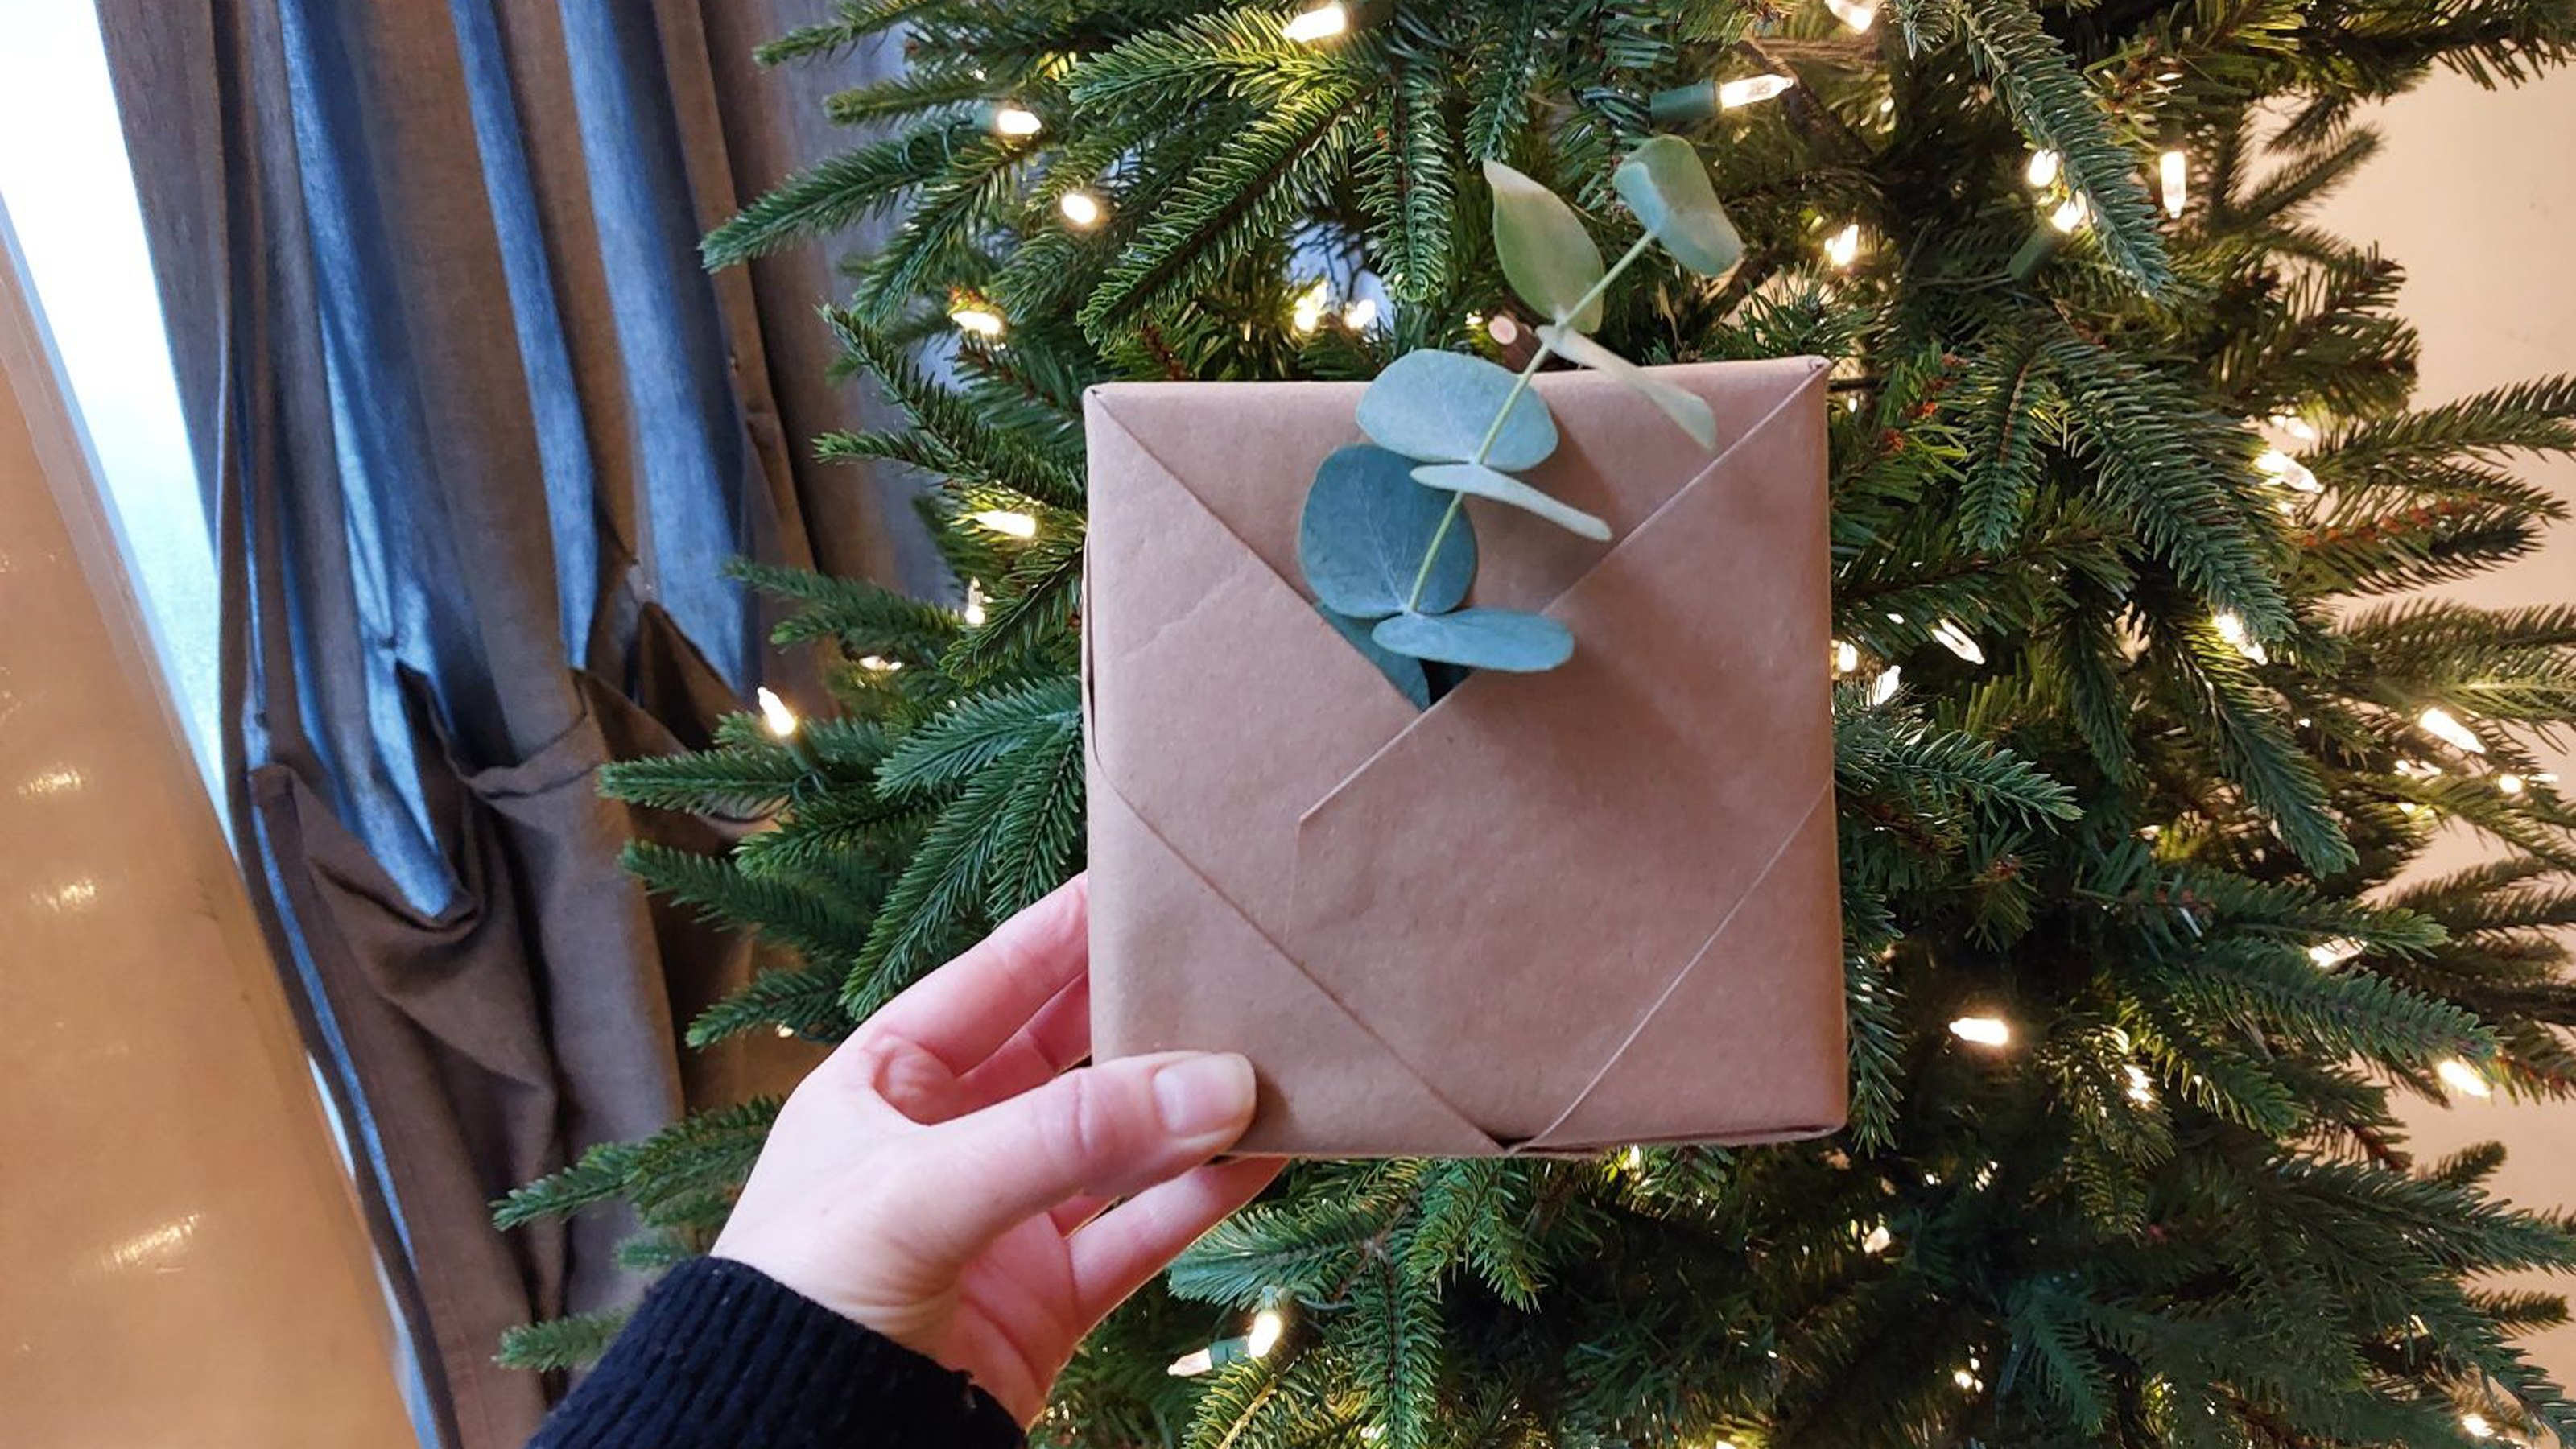 How to wrap a gift using no tape!, How to wrap a gift using no tape!